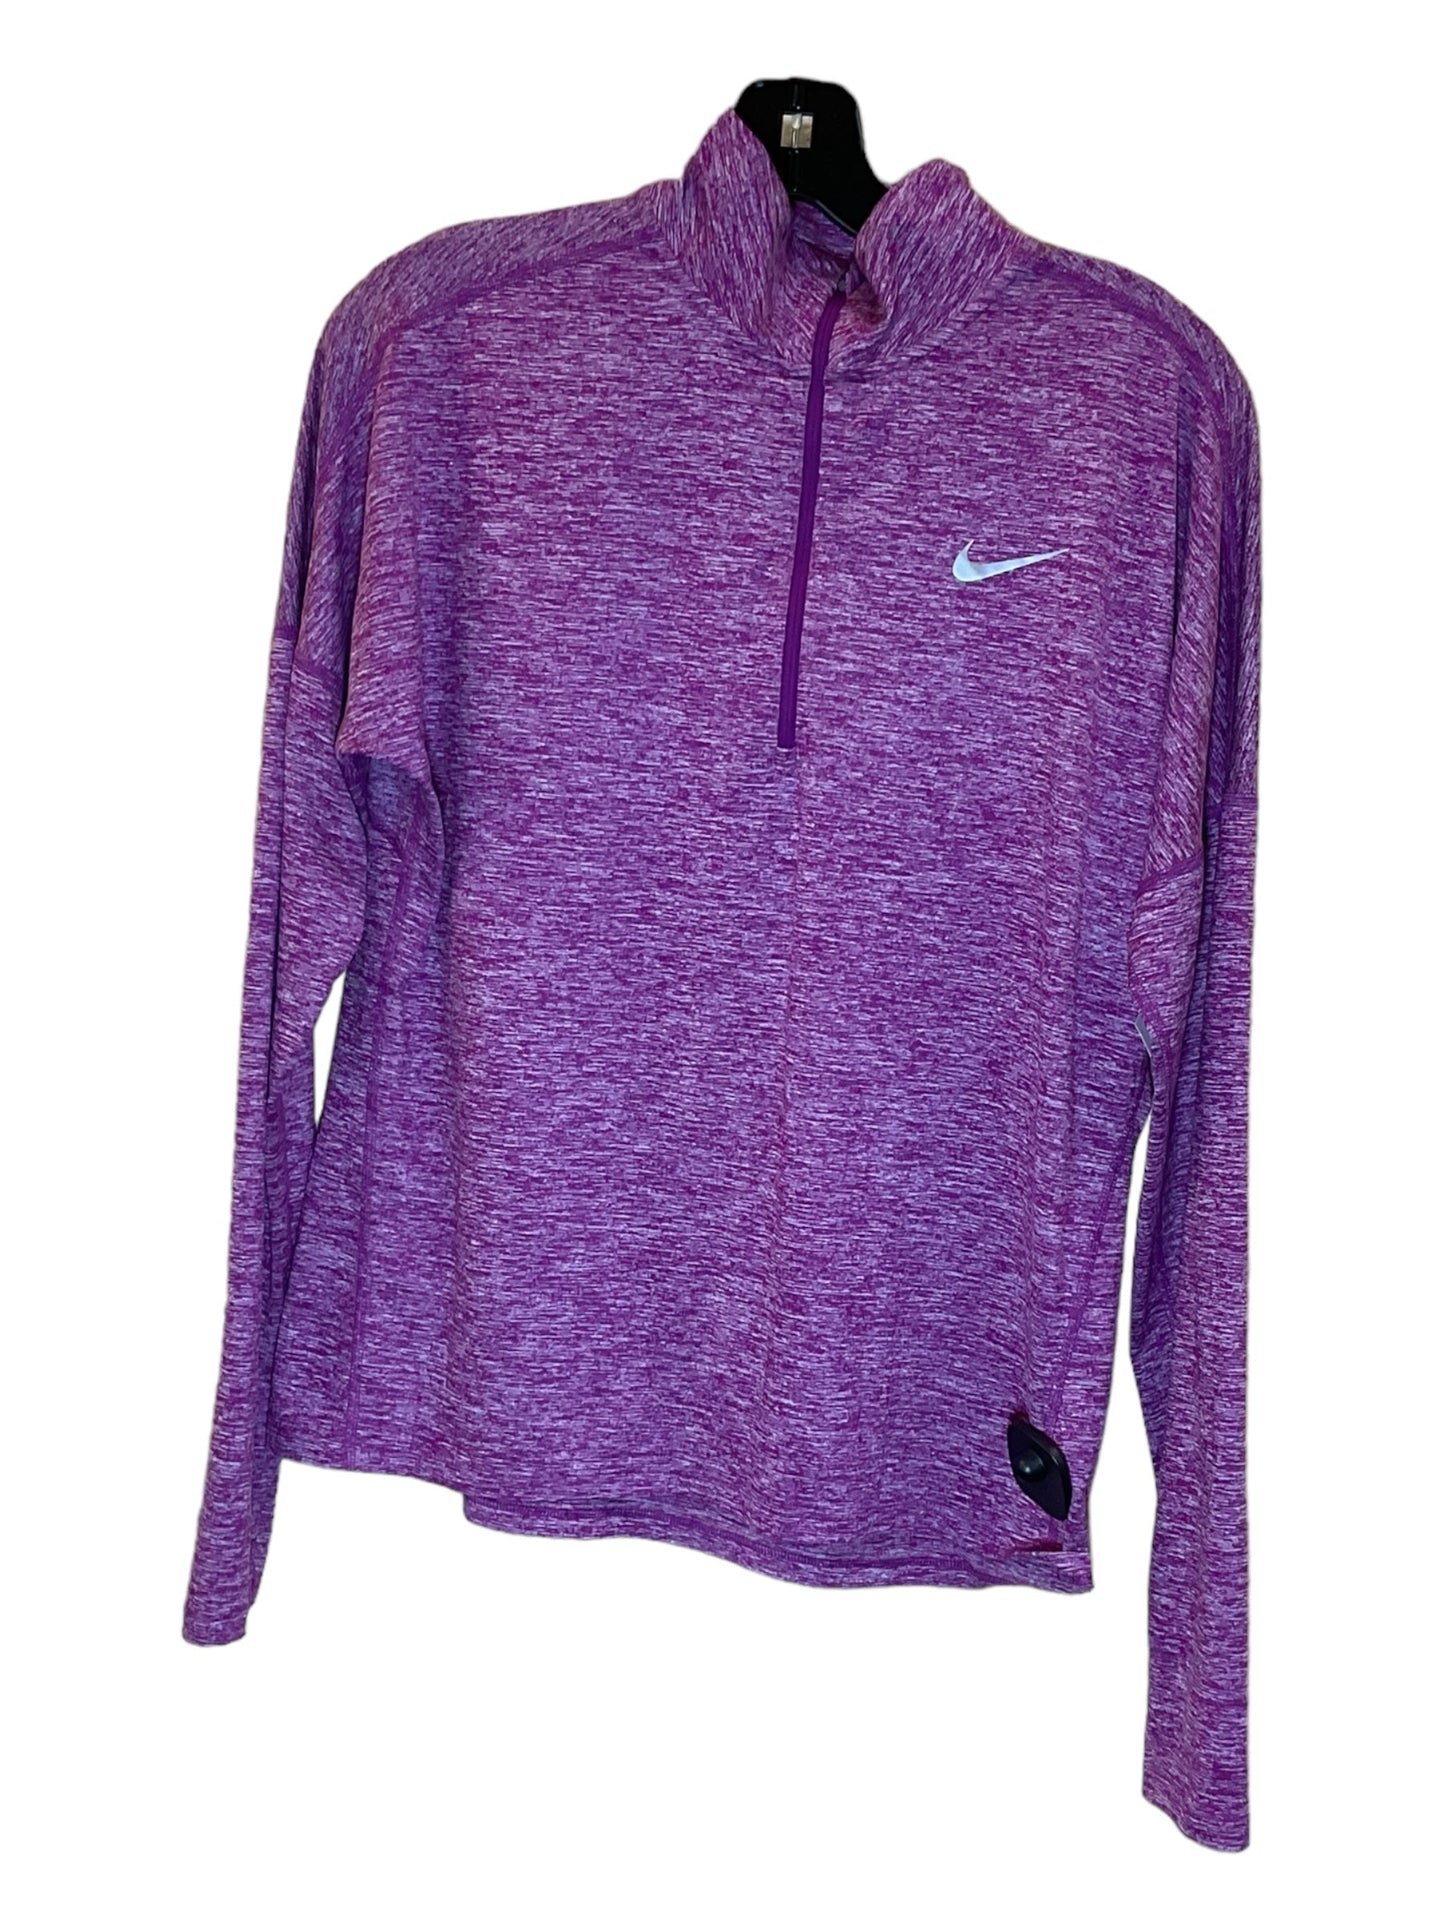 Lavender Athletic Top Long Sleeve Collar Nike Apparel, Size M